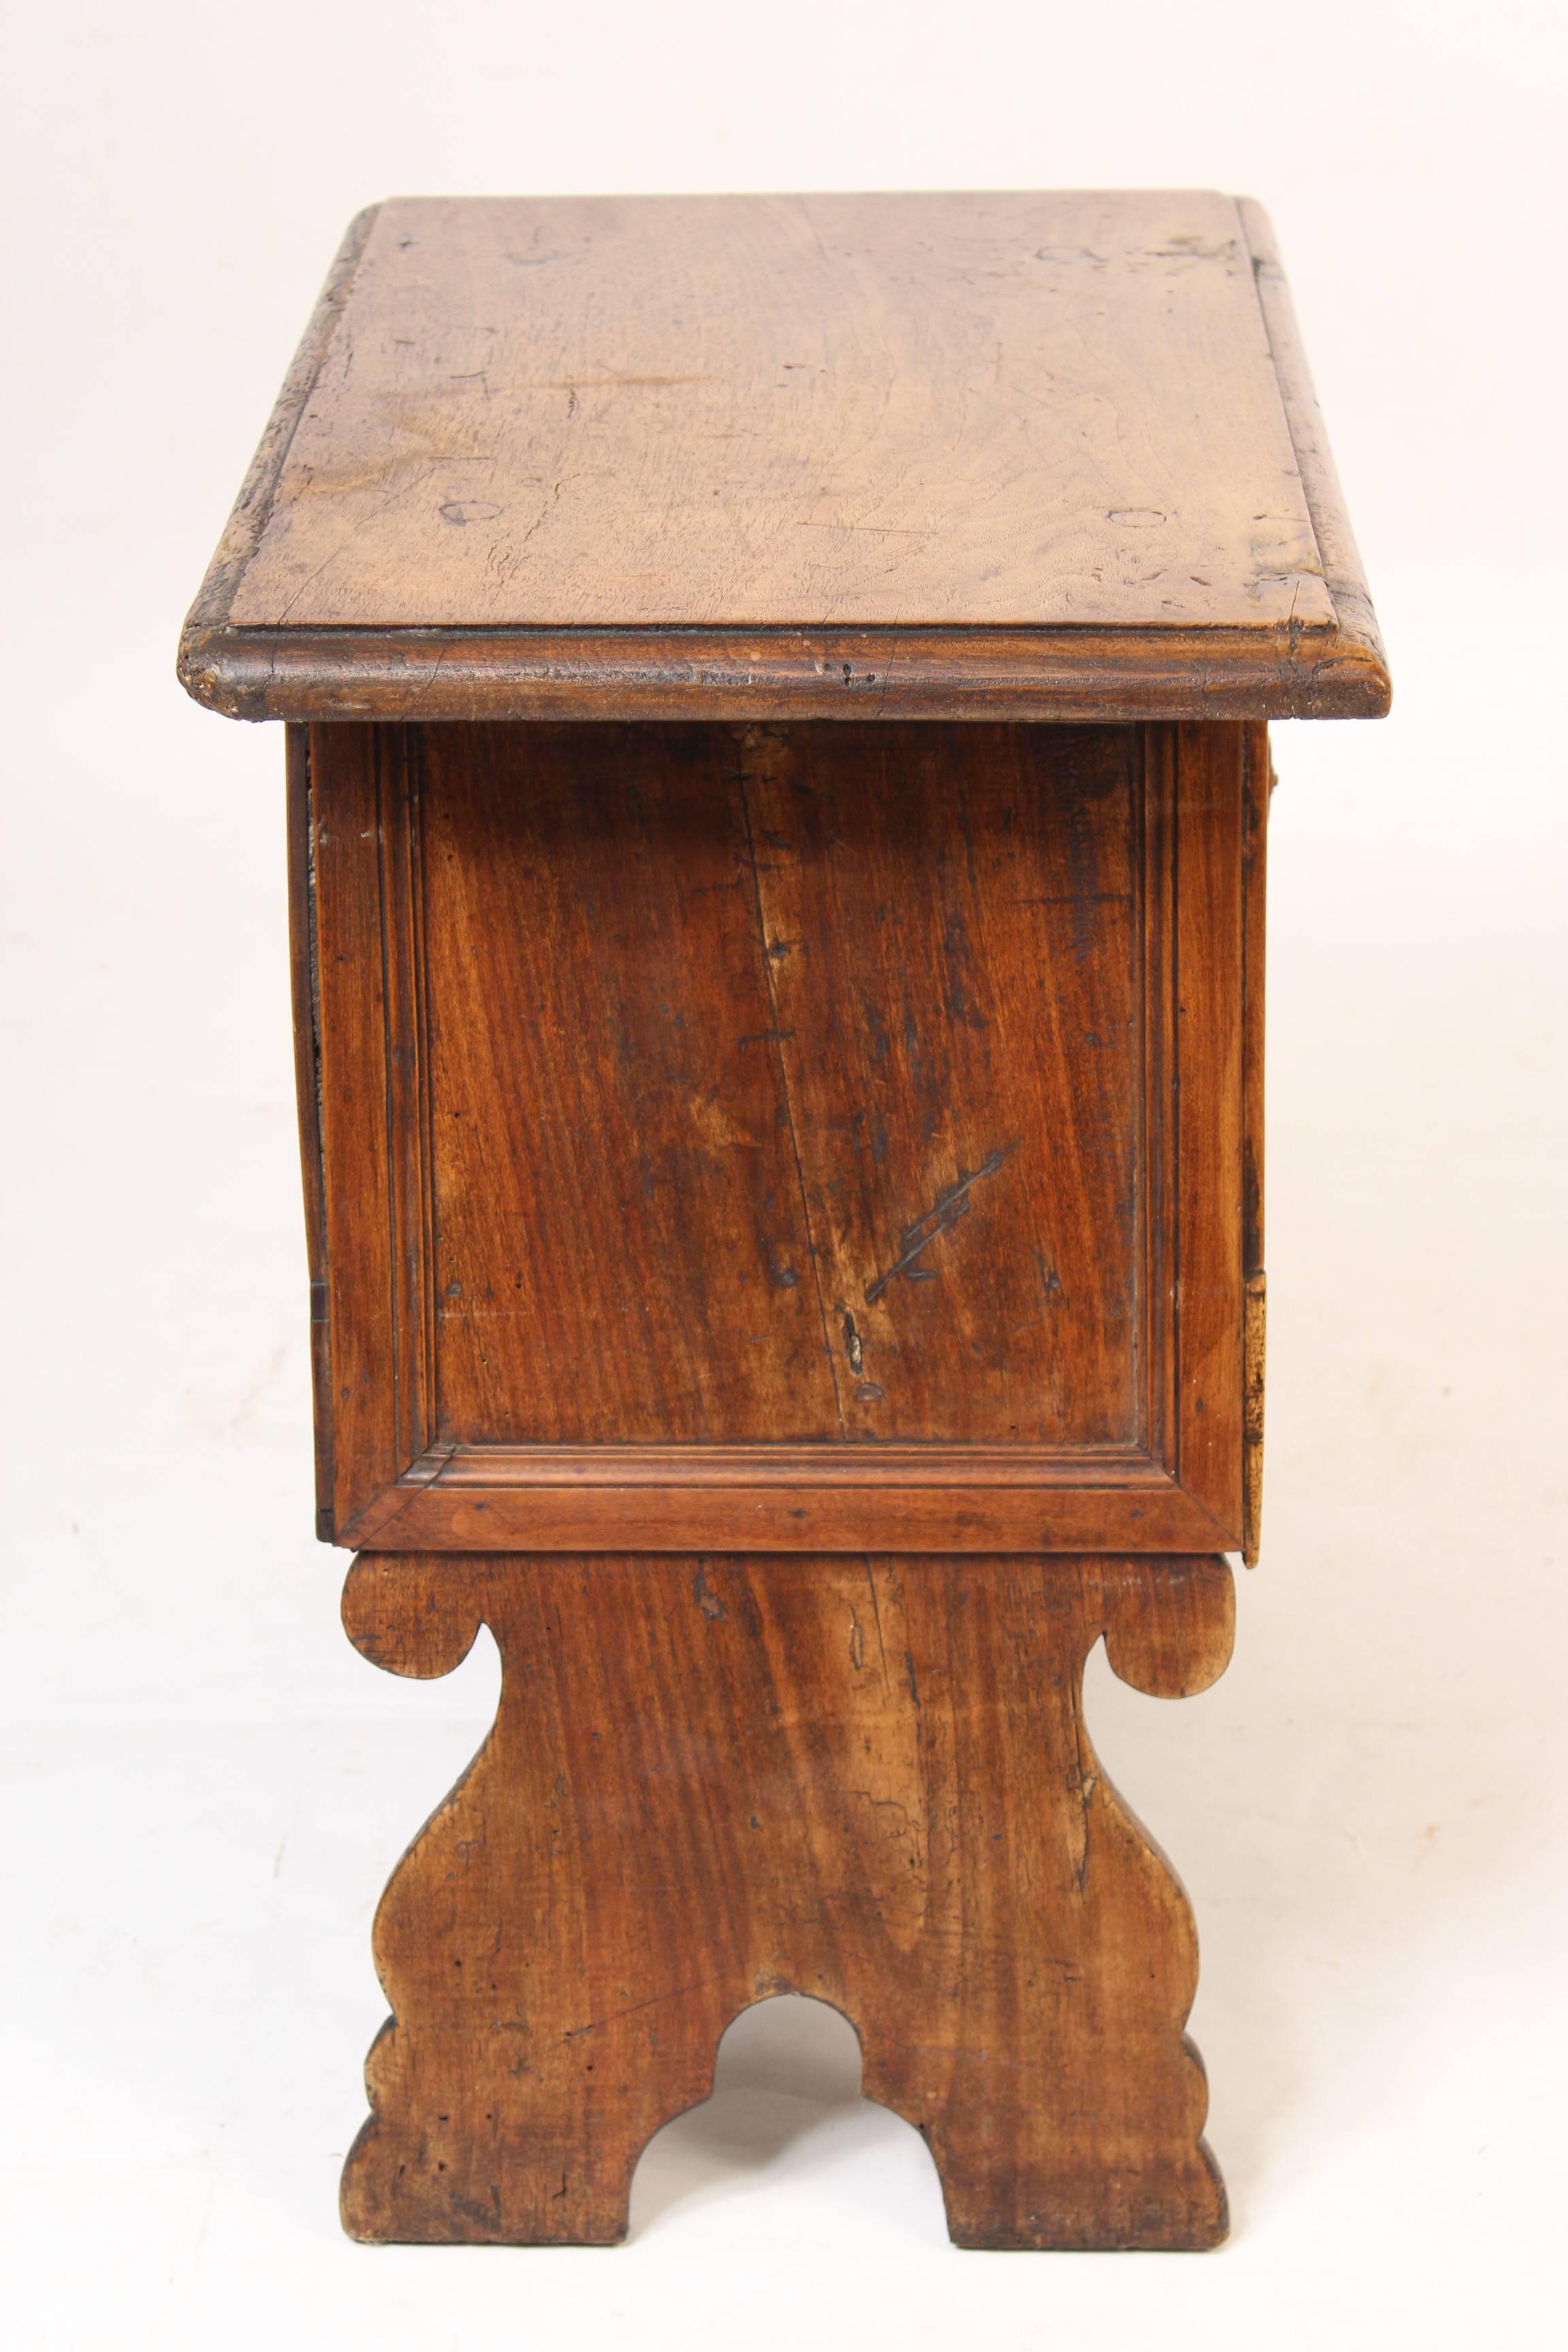 Continental antique Baroque style single door occasional table, circa 1890-1910. The walnut on this table has excellent old color.